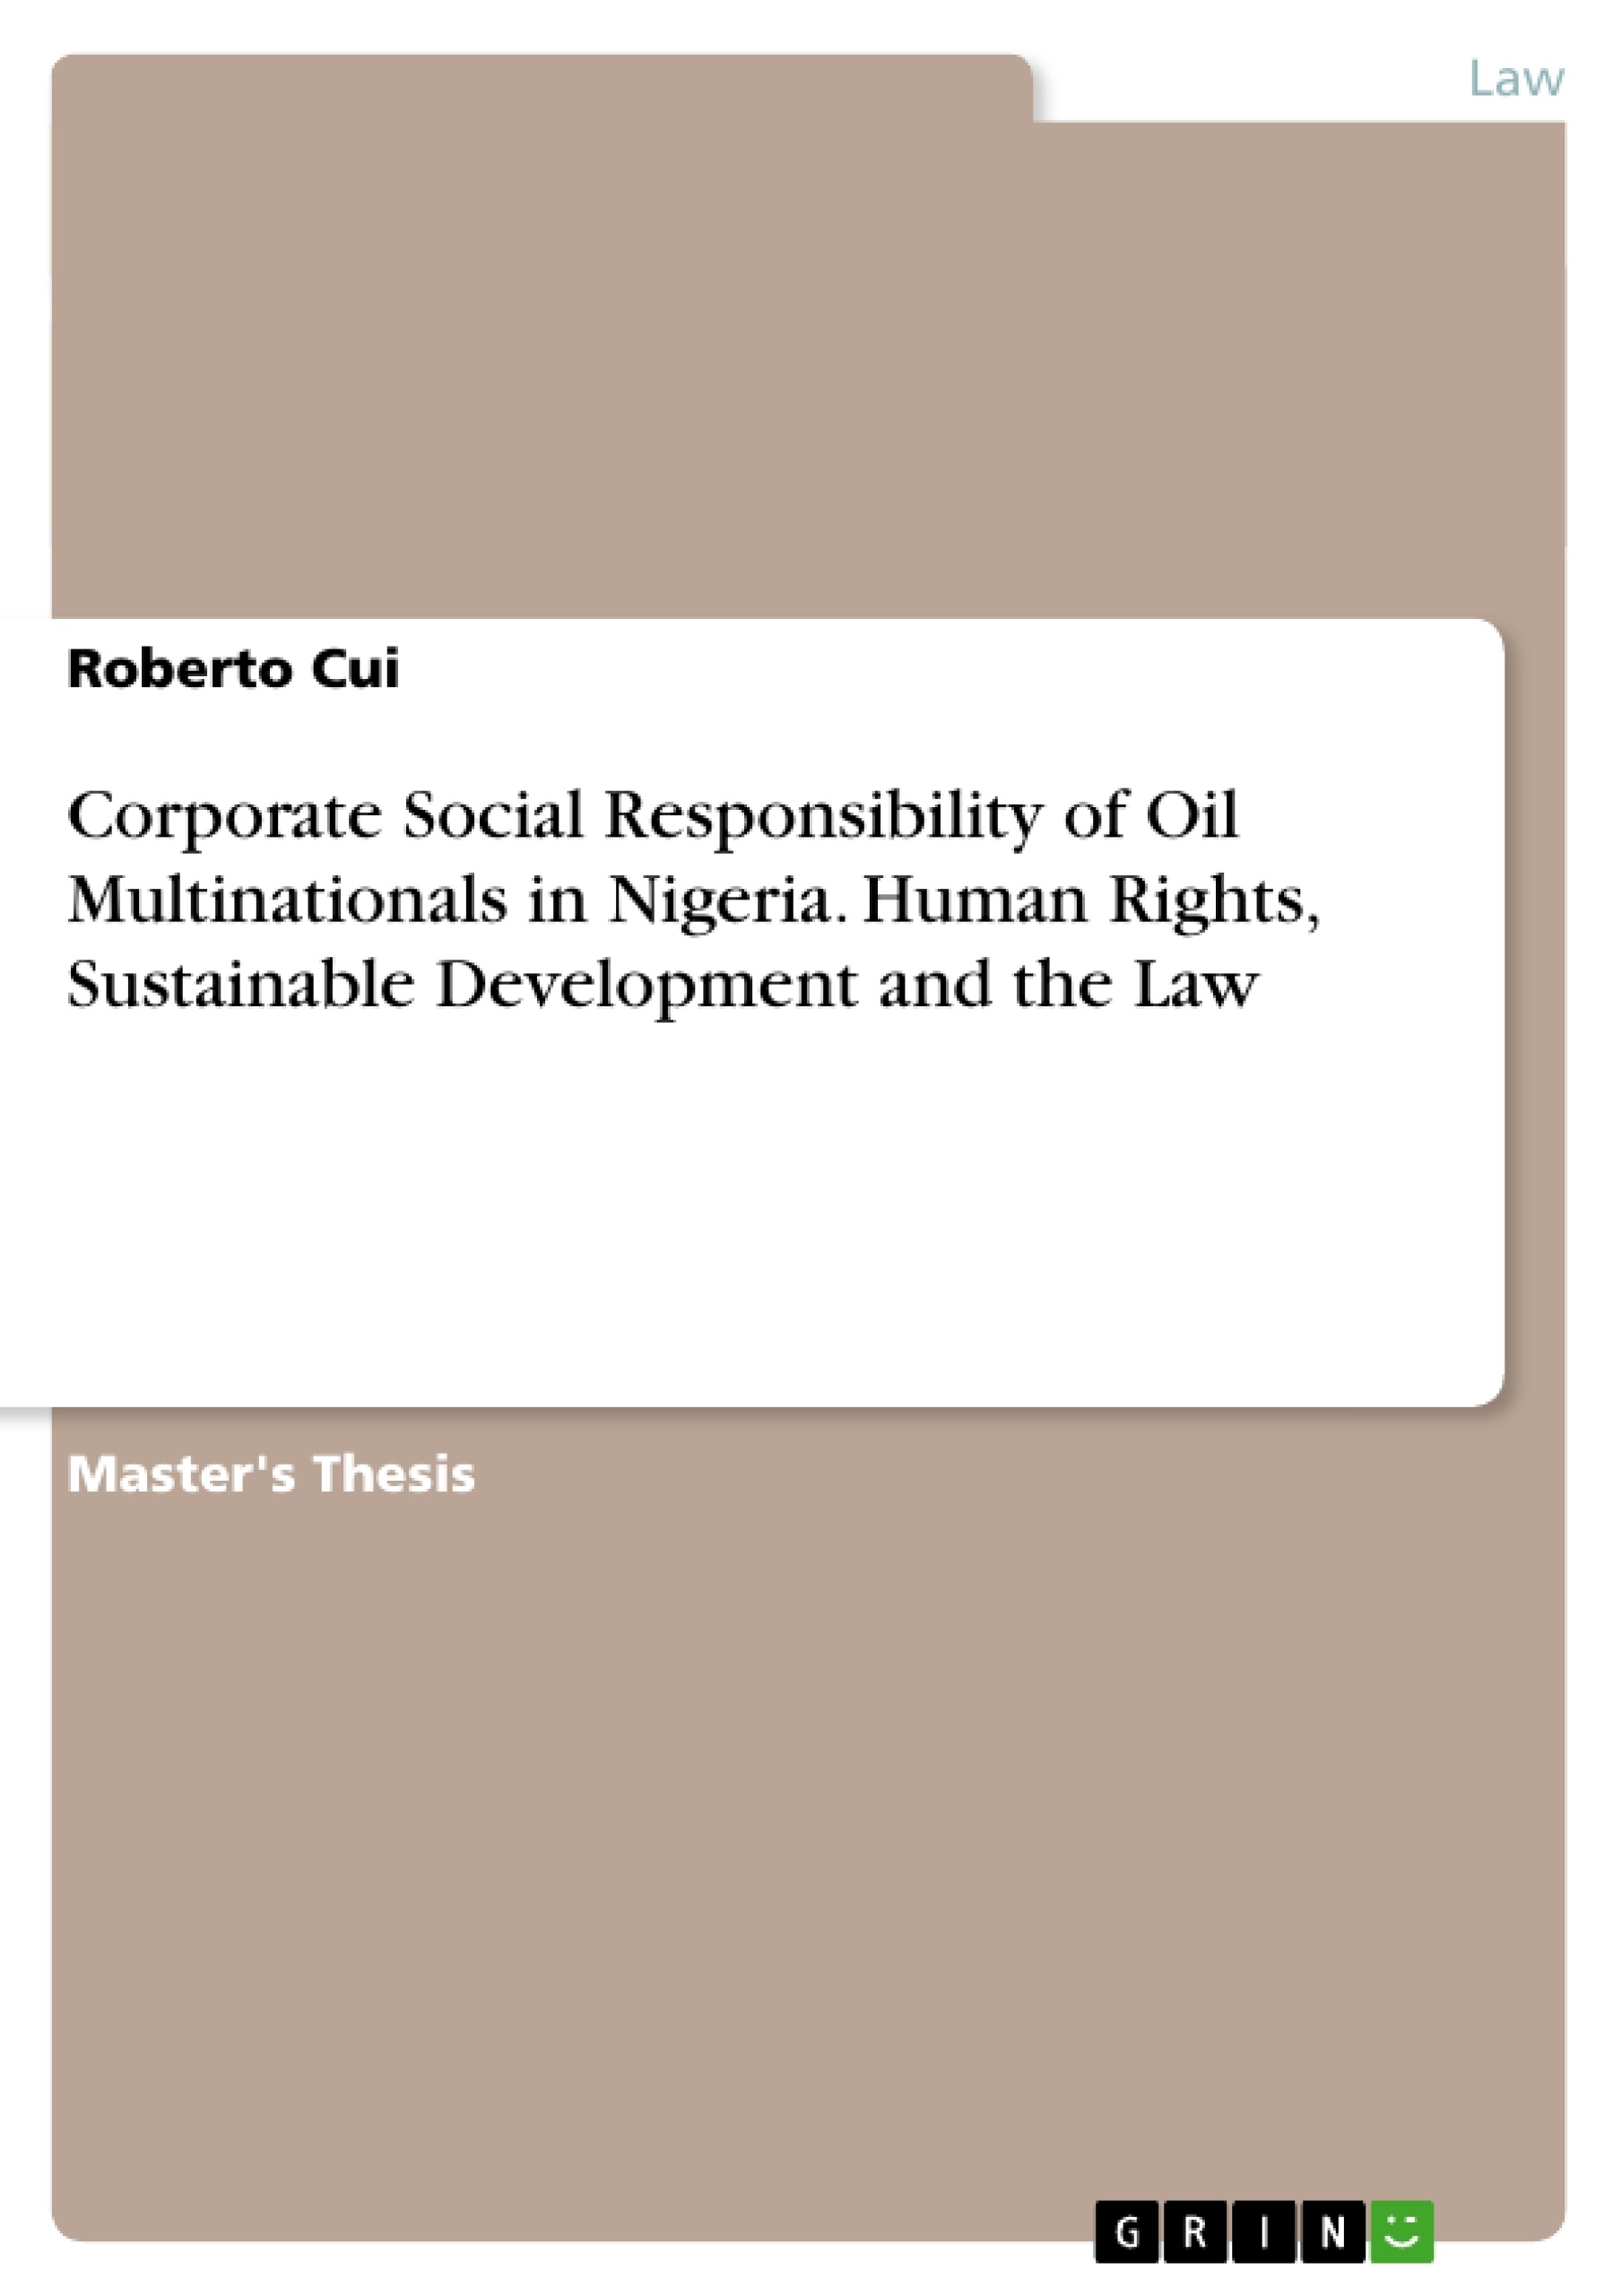 Title: Corporate Social Responsibility of Oil Multinationals in Nigeria. Human Rights, Sustainable Development and the Law